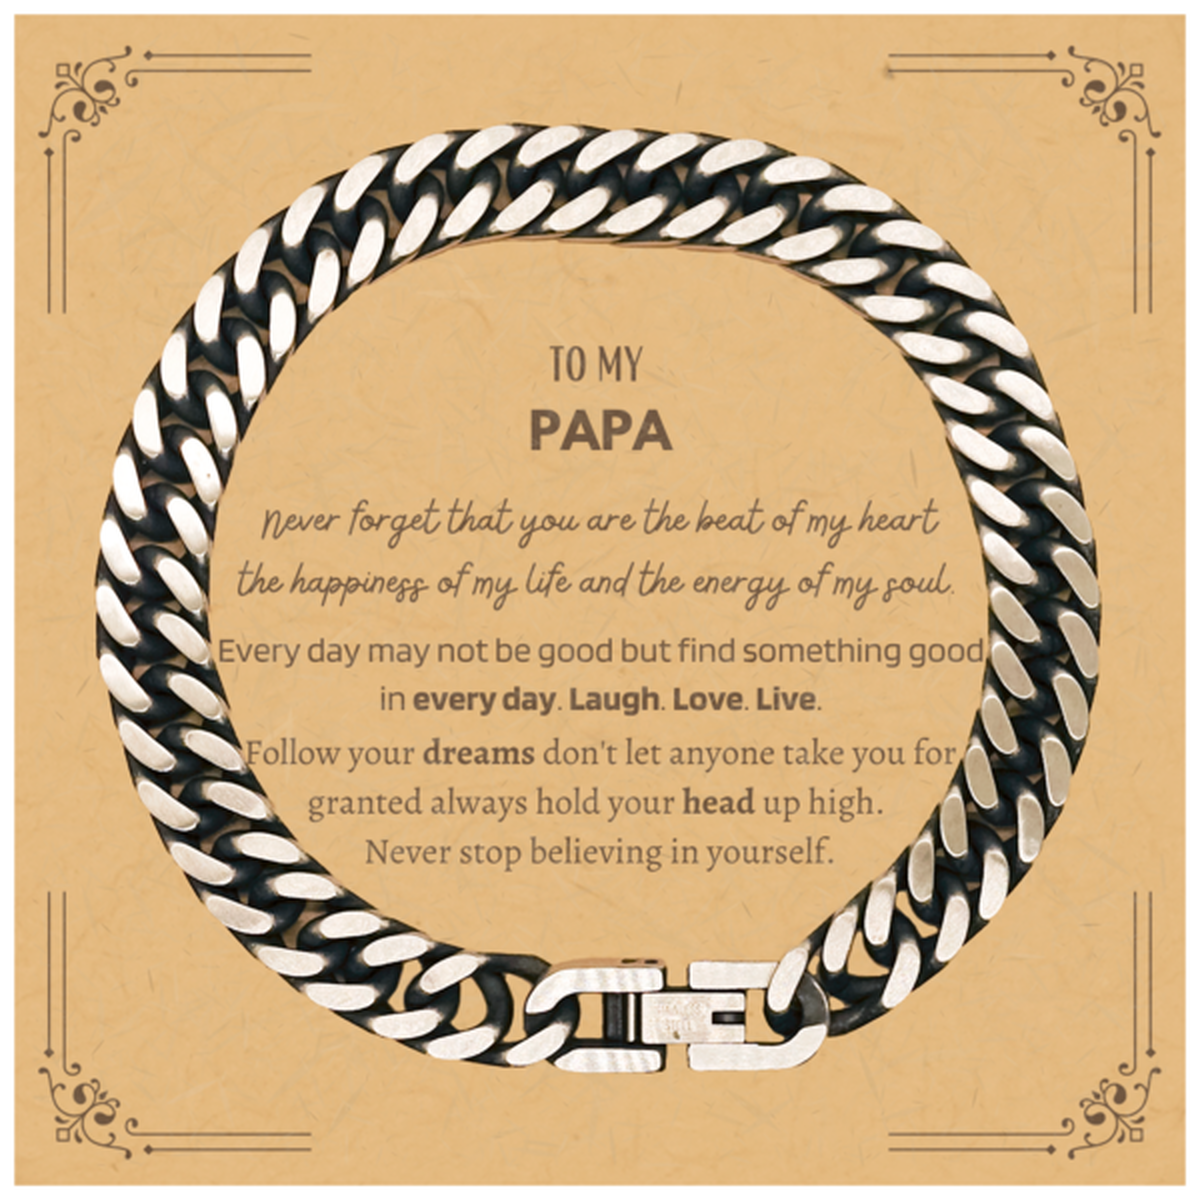 To My Papa Message Card Gifts, Christmas Papa Cuban Link Chain Bracelet Present, Birthday Unique Motivational For Papa, To My Papa Never forget that you are the beat of my heart the happiness of my life and the energy of my soul